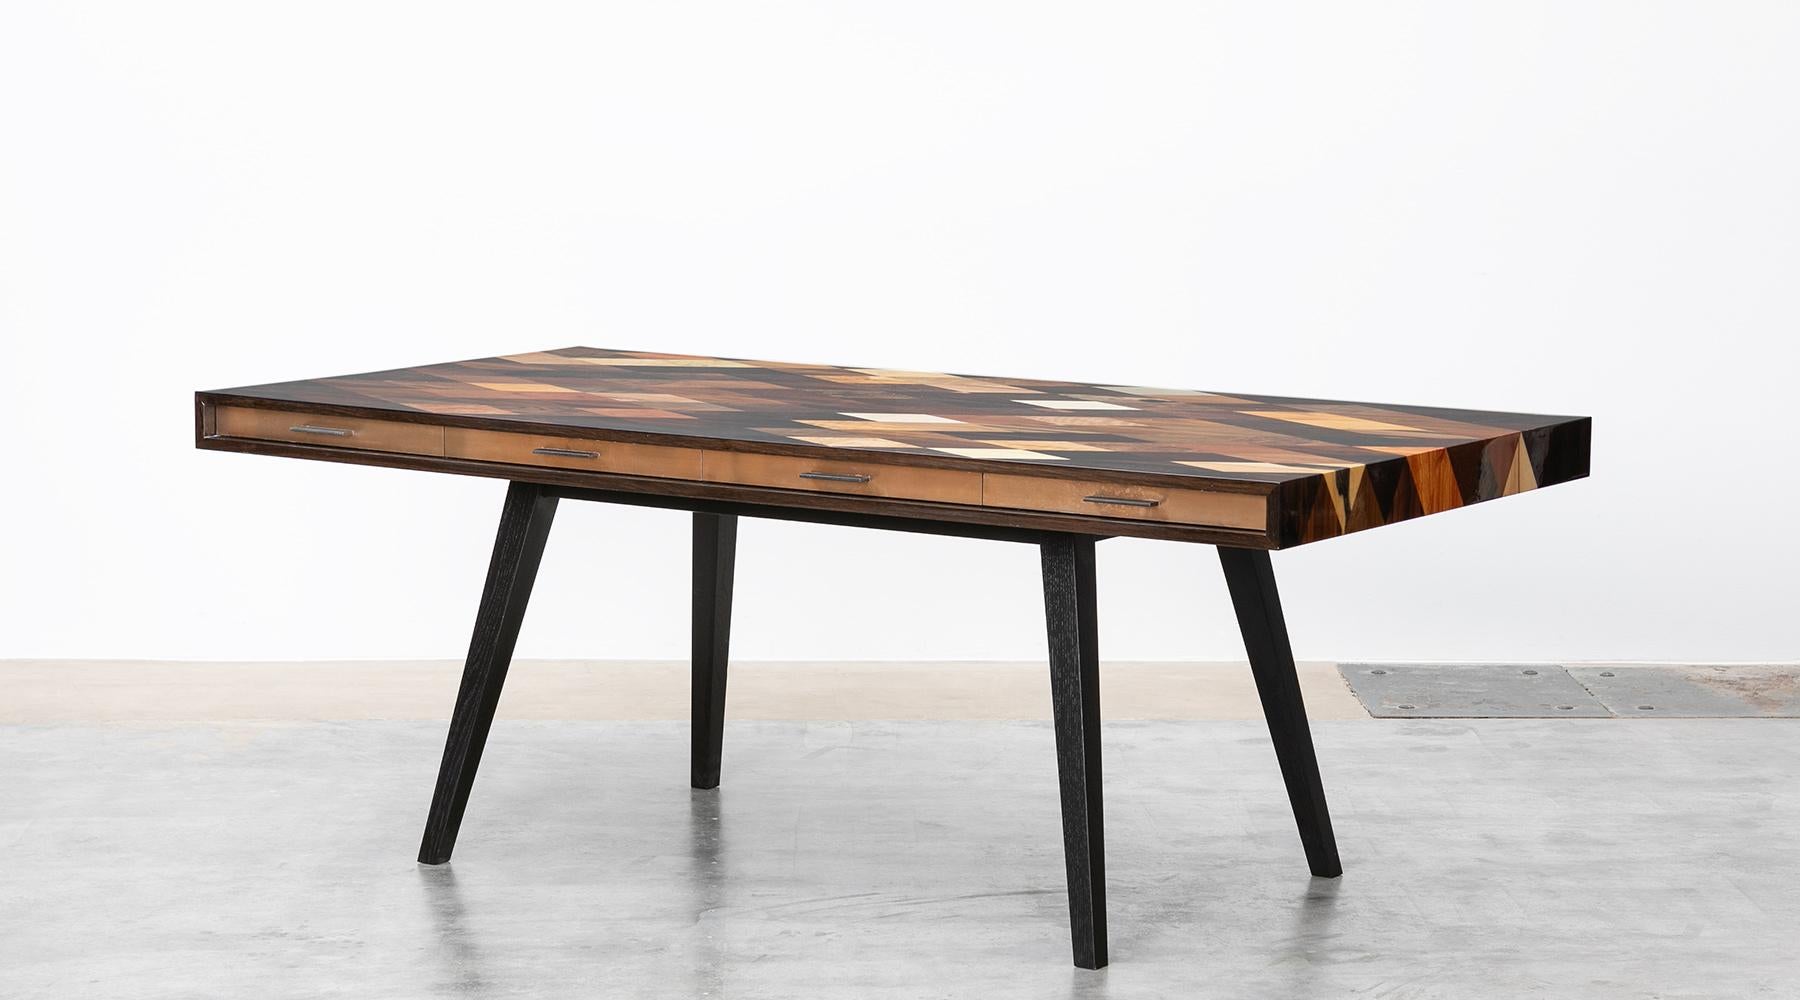 Stunning desk by contemporary German Artist Johannes Hock. A well proportioned body situated on a solid wood base. The surface of rhombs, joined in different veneers, apparently flowing over the table edges. Bronze drawers with ebony handles